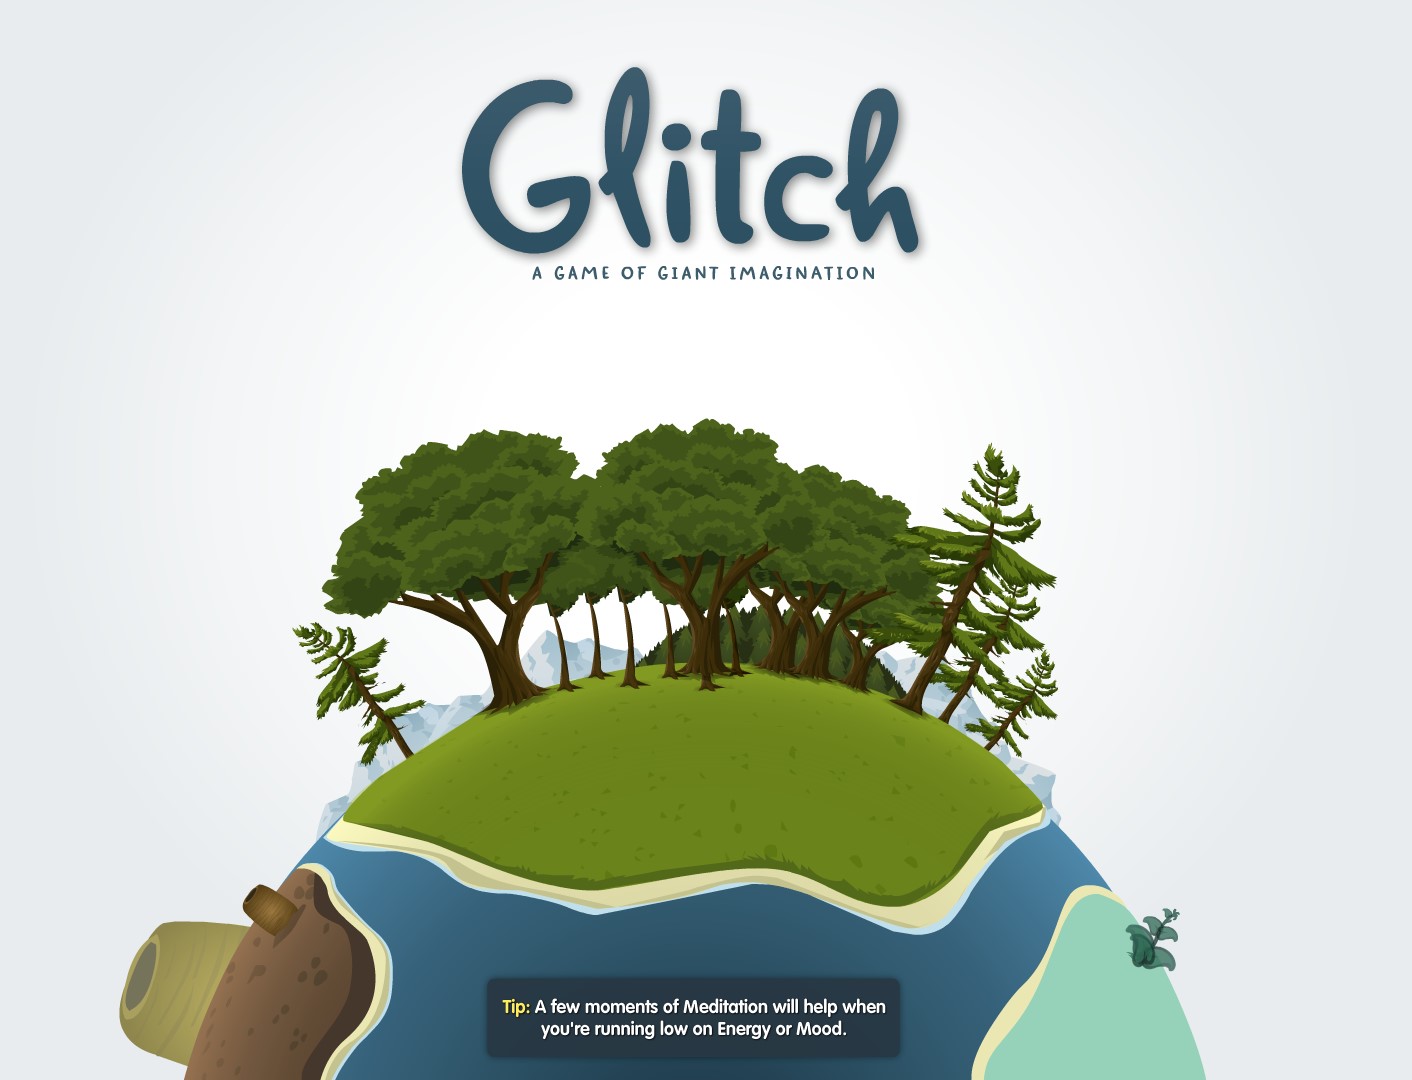 Bored during lunch time? Need a game? Try Glitch